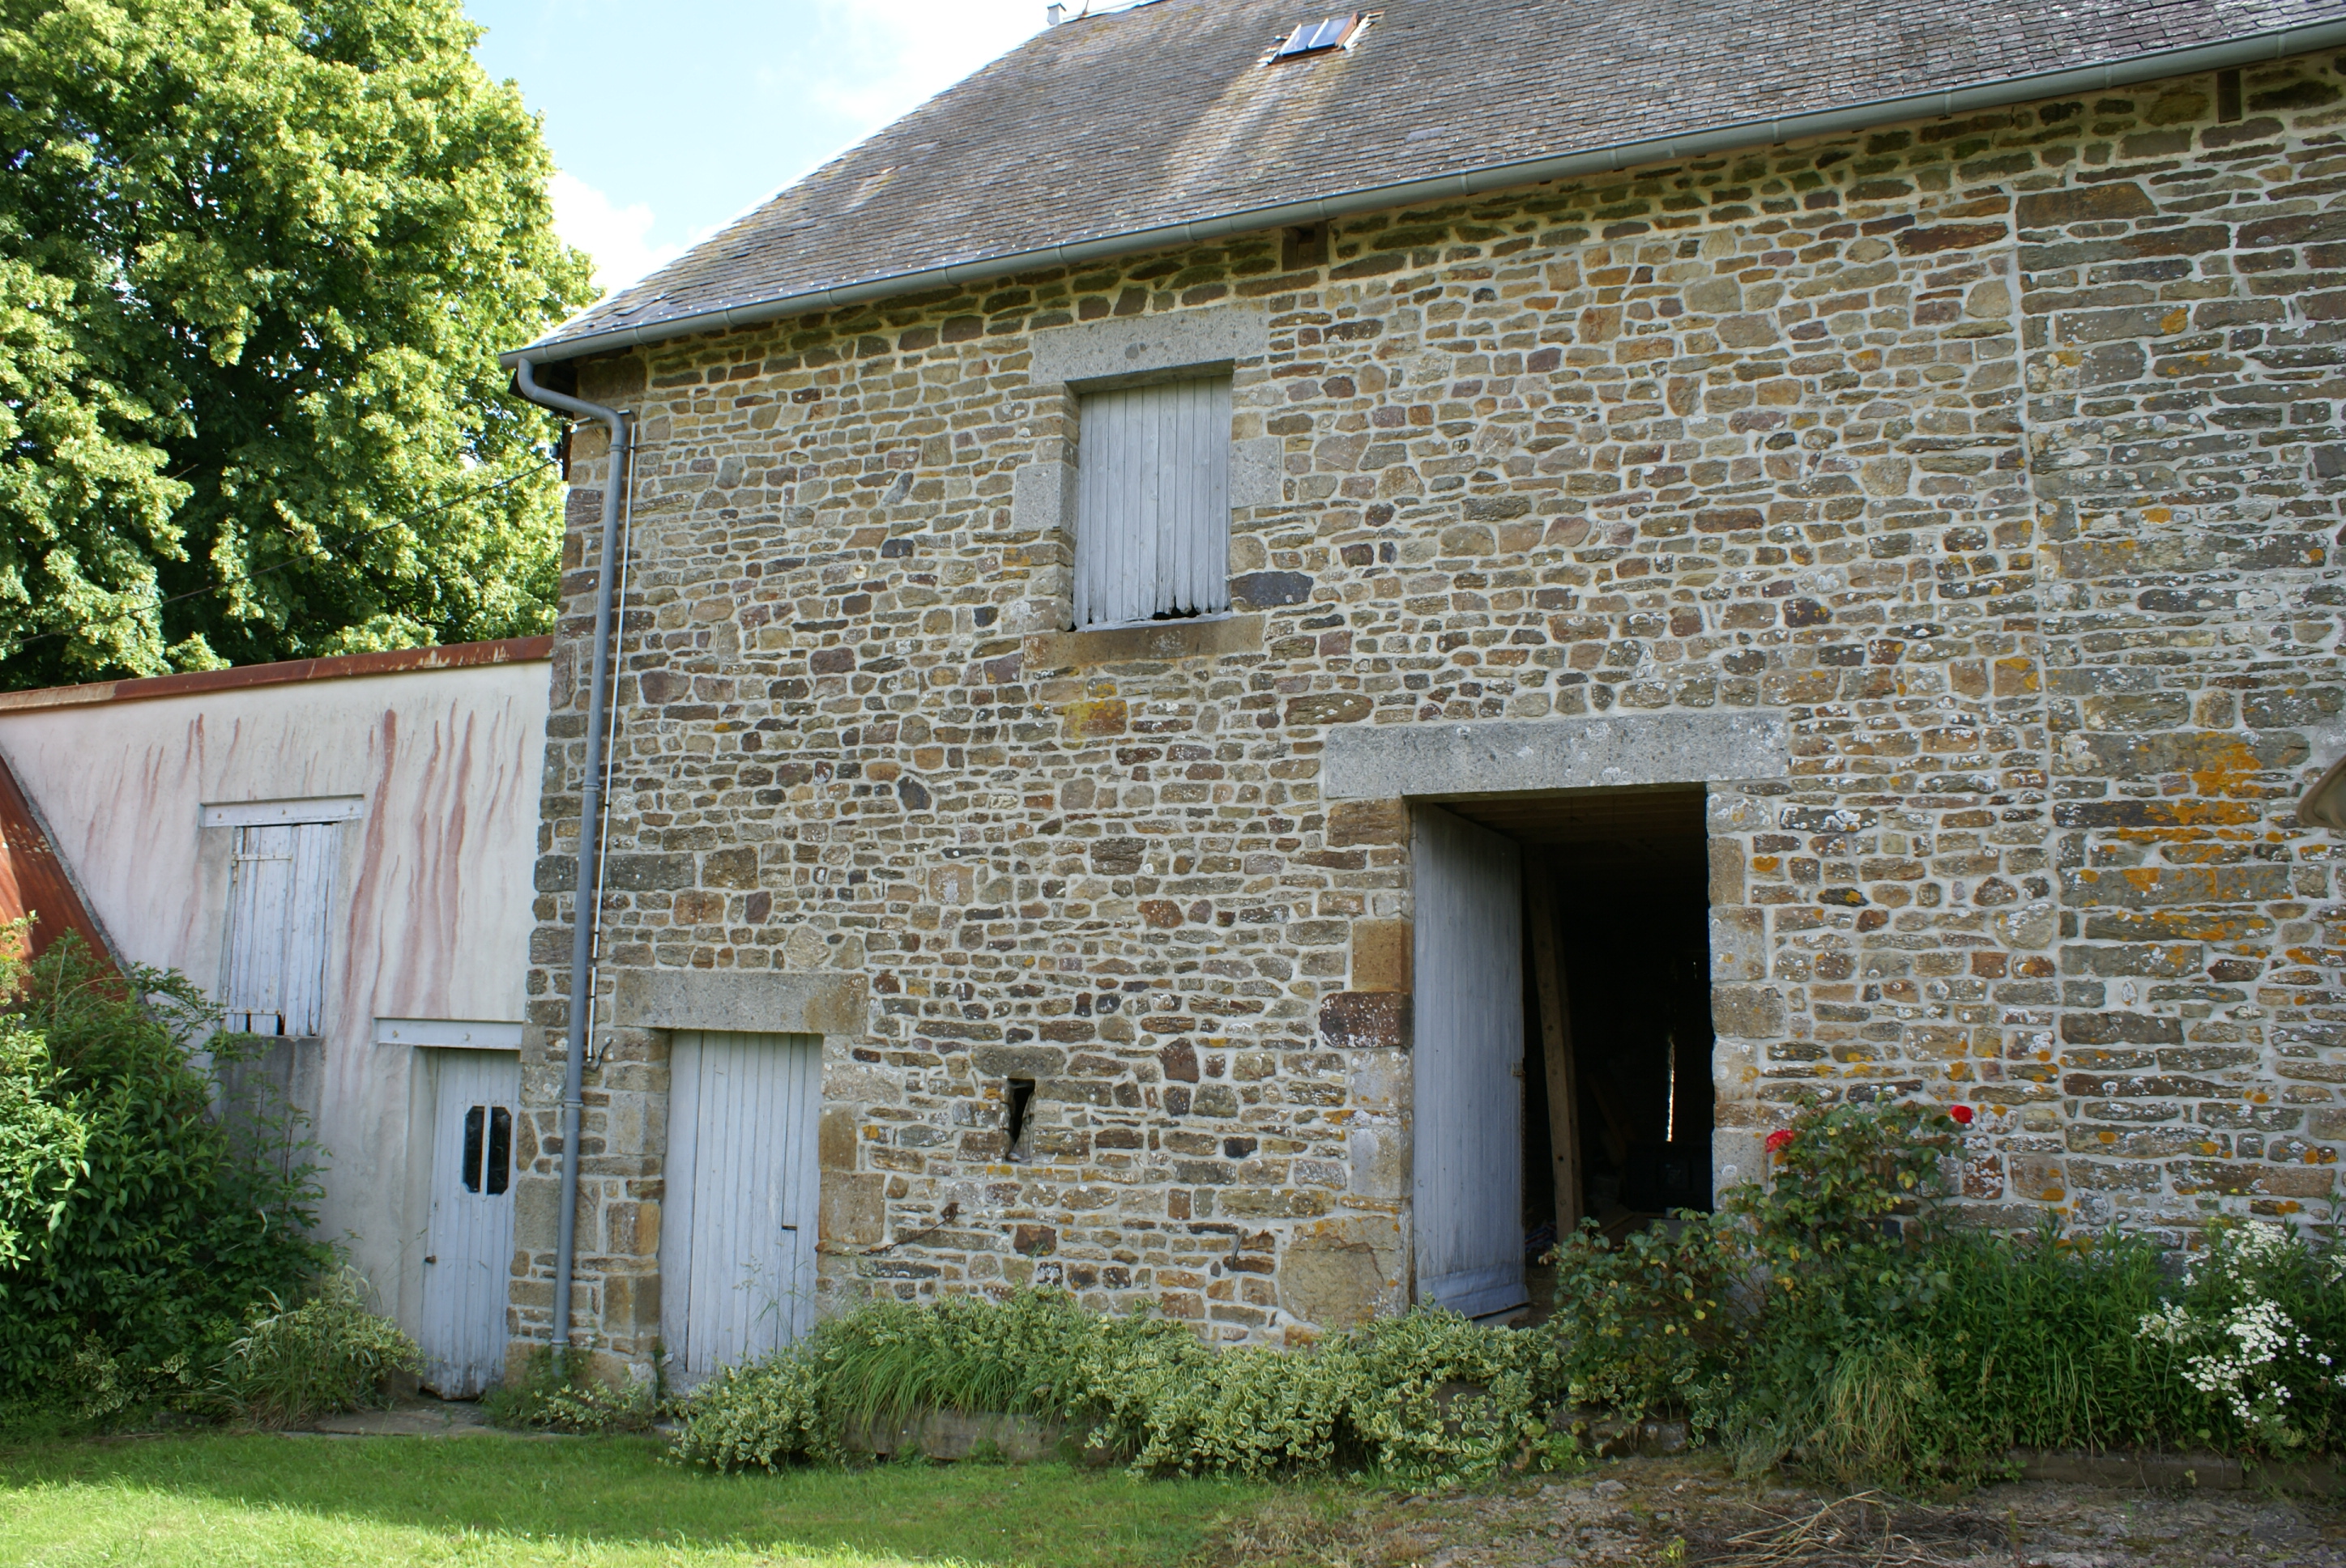 A before picture of Eco-Gites of Lenault, a holiday cottage in Normandy